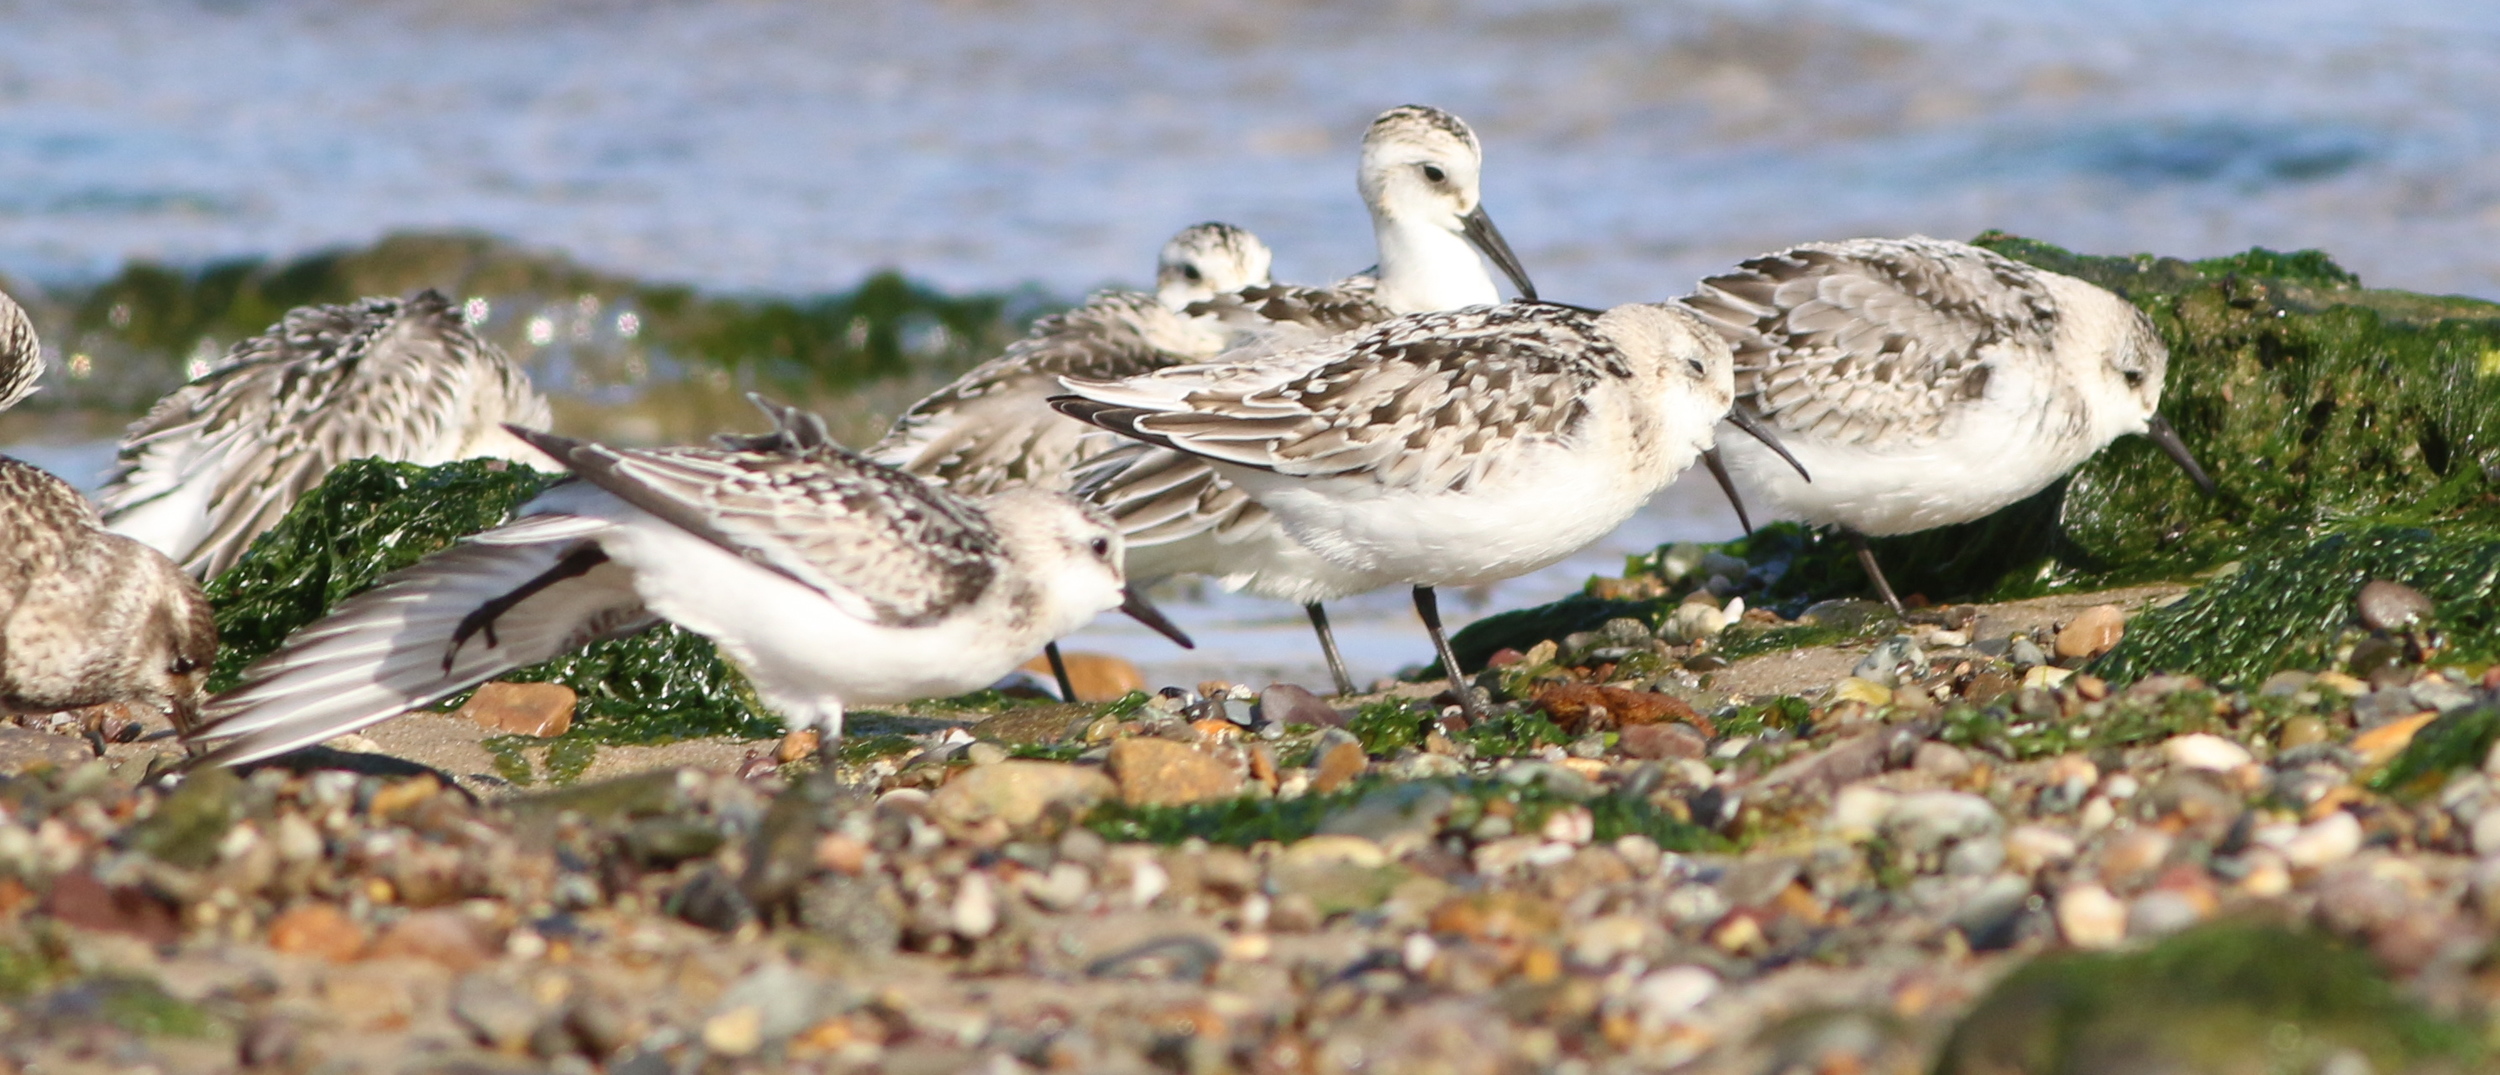  Sanderlings and White-rumped Sandpiper (the smaller one) 